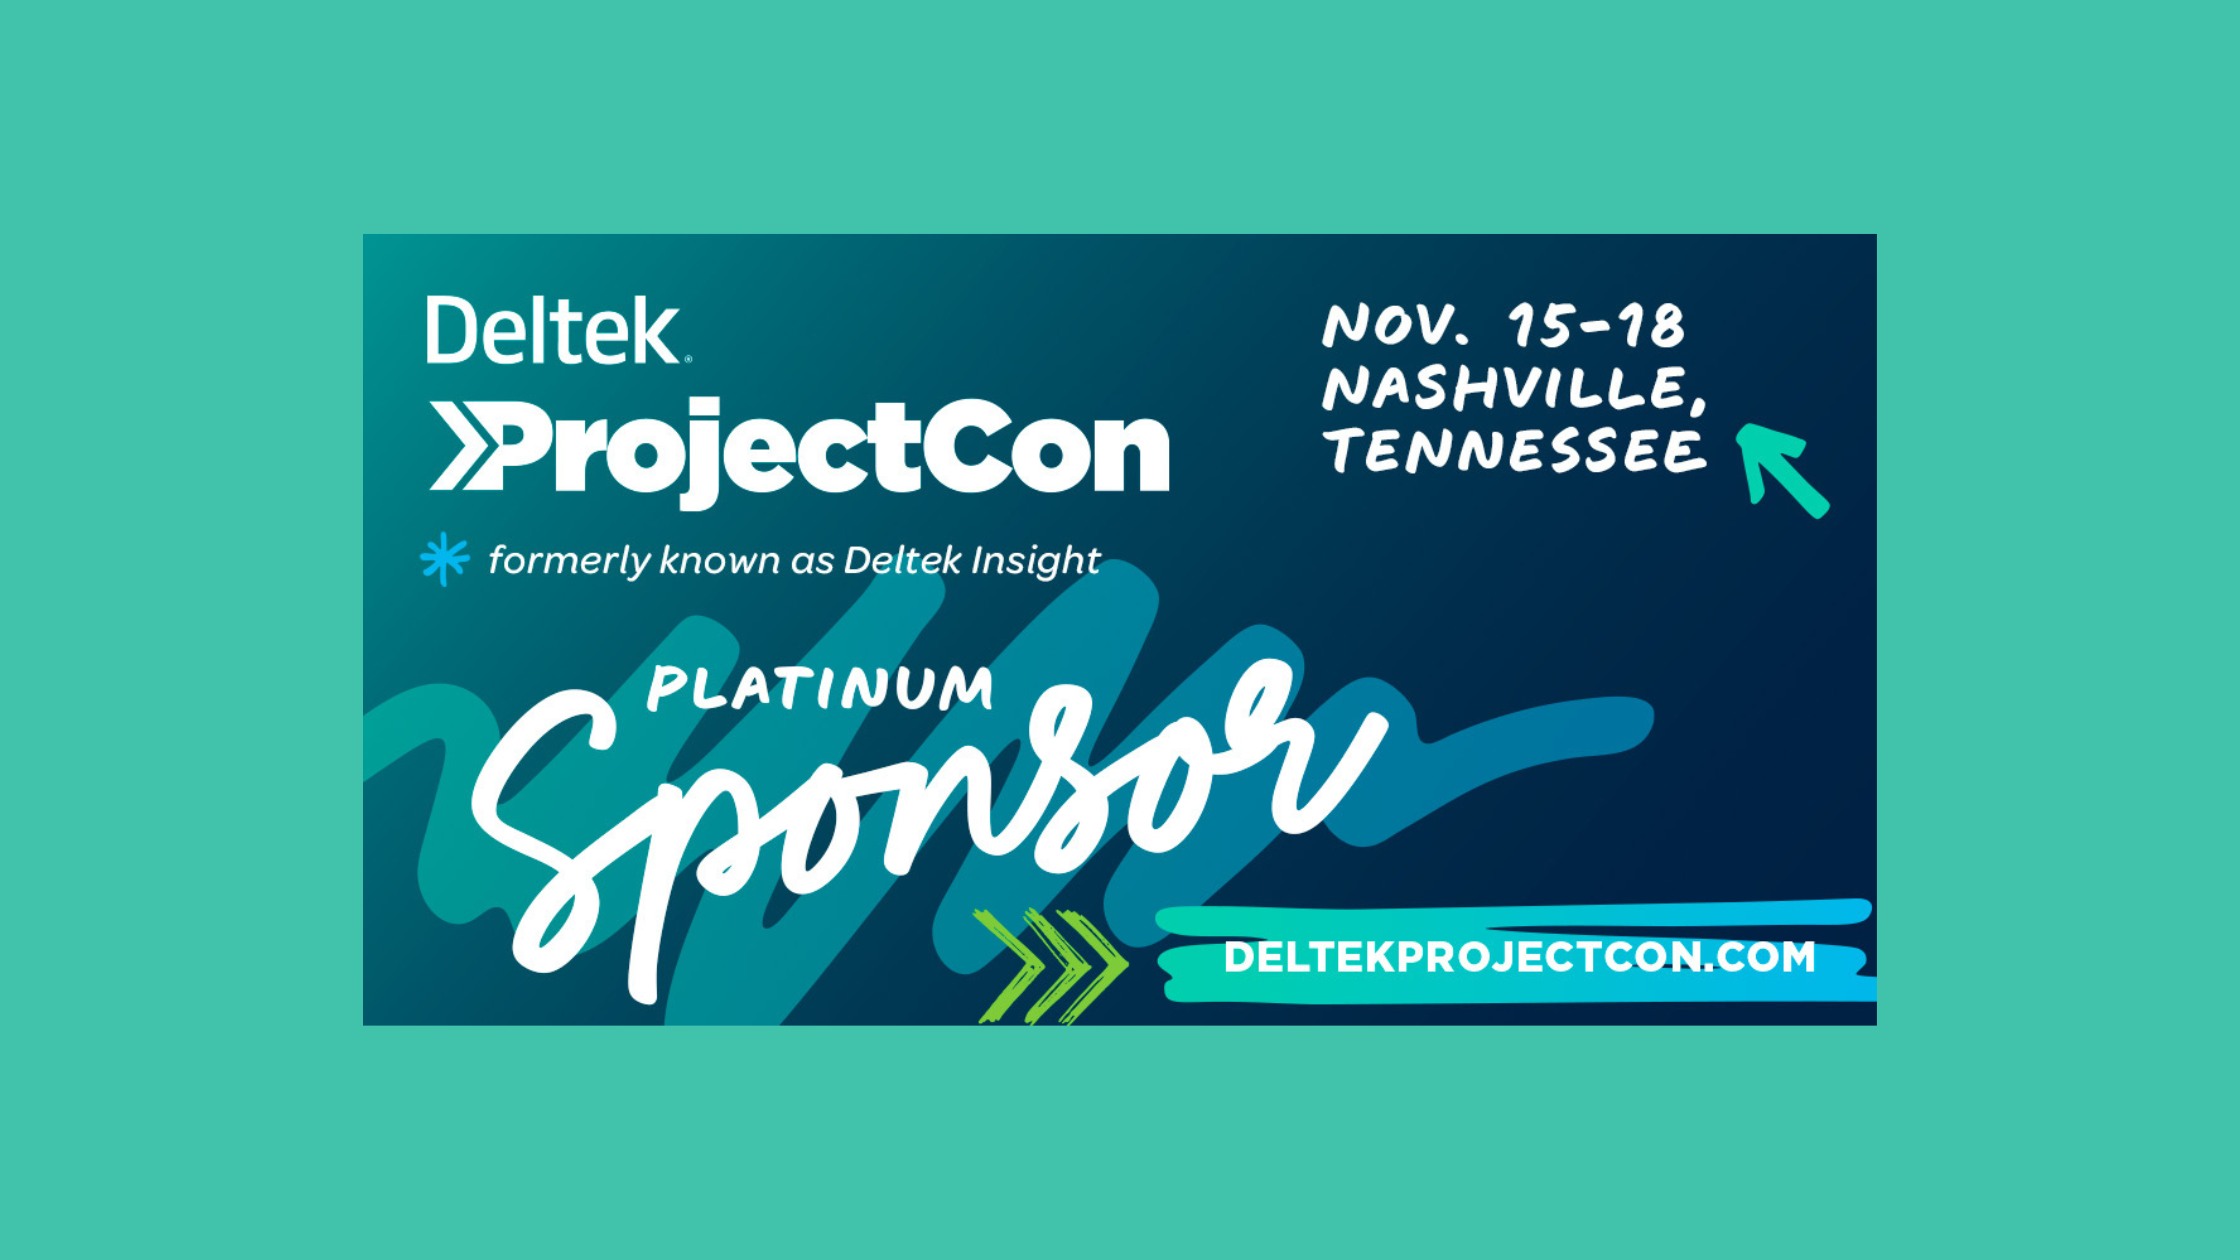 6 Reasons to Attend Deltek ProjectCon Premier Consulting & Integration